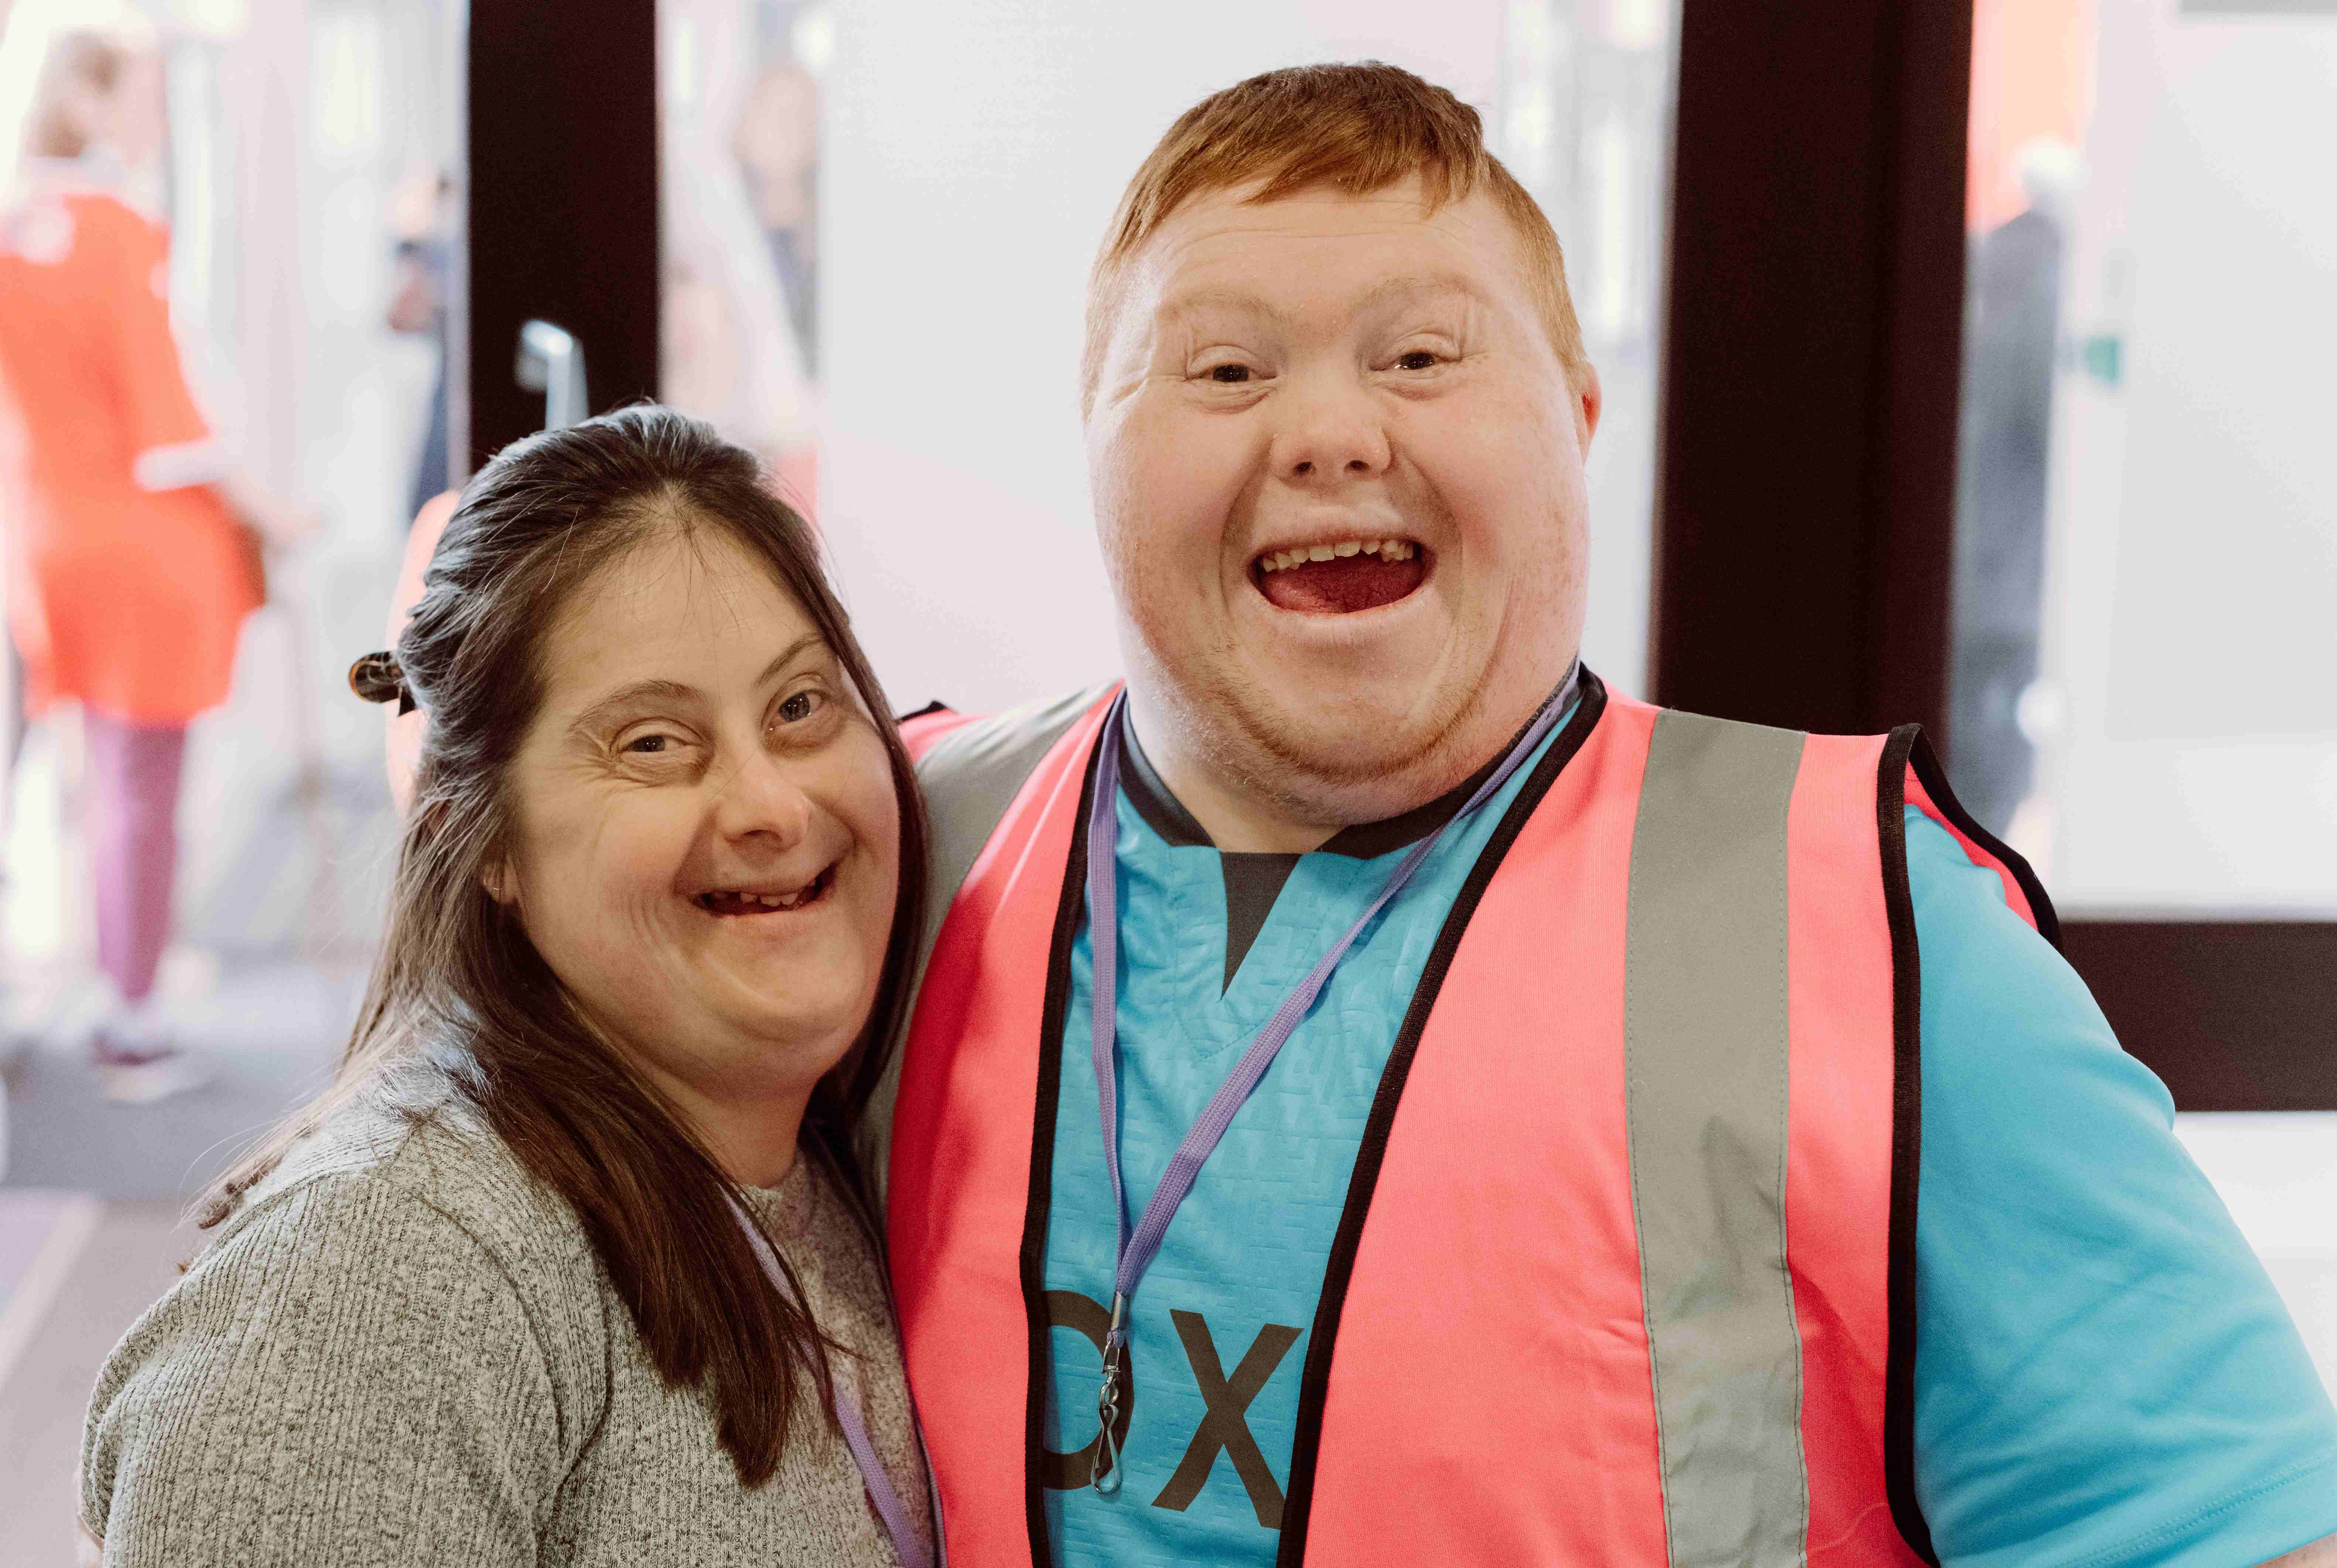 A man and woman with downs syndrome smiling at the camera